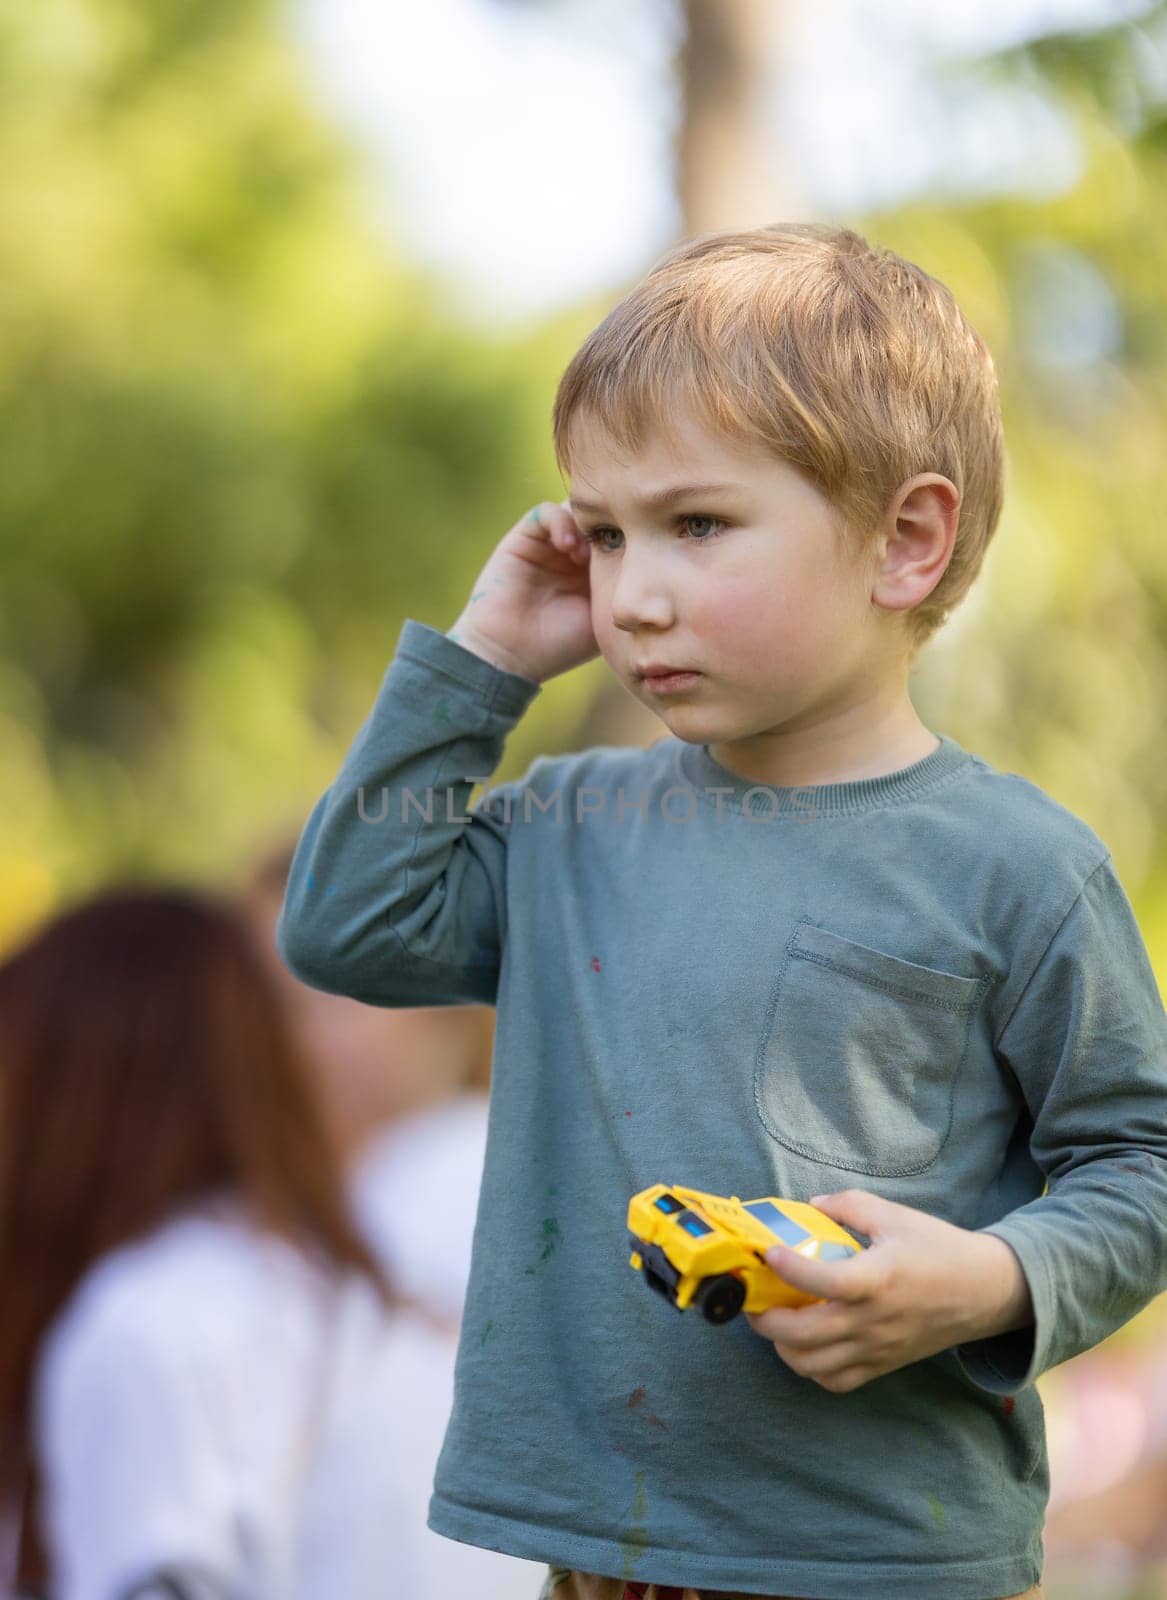 A young boy is holding a toy car and talking on a cell phone. He is wearing a green shirt and has a pocket on his shirt